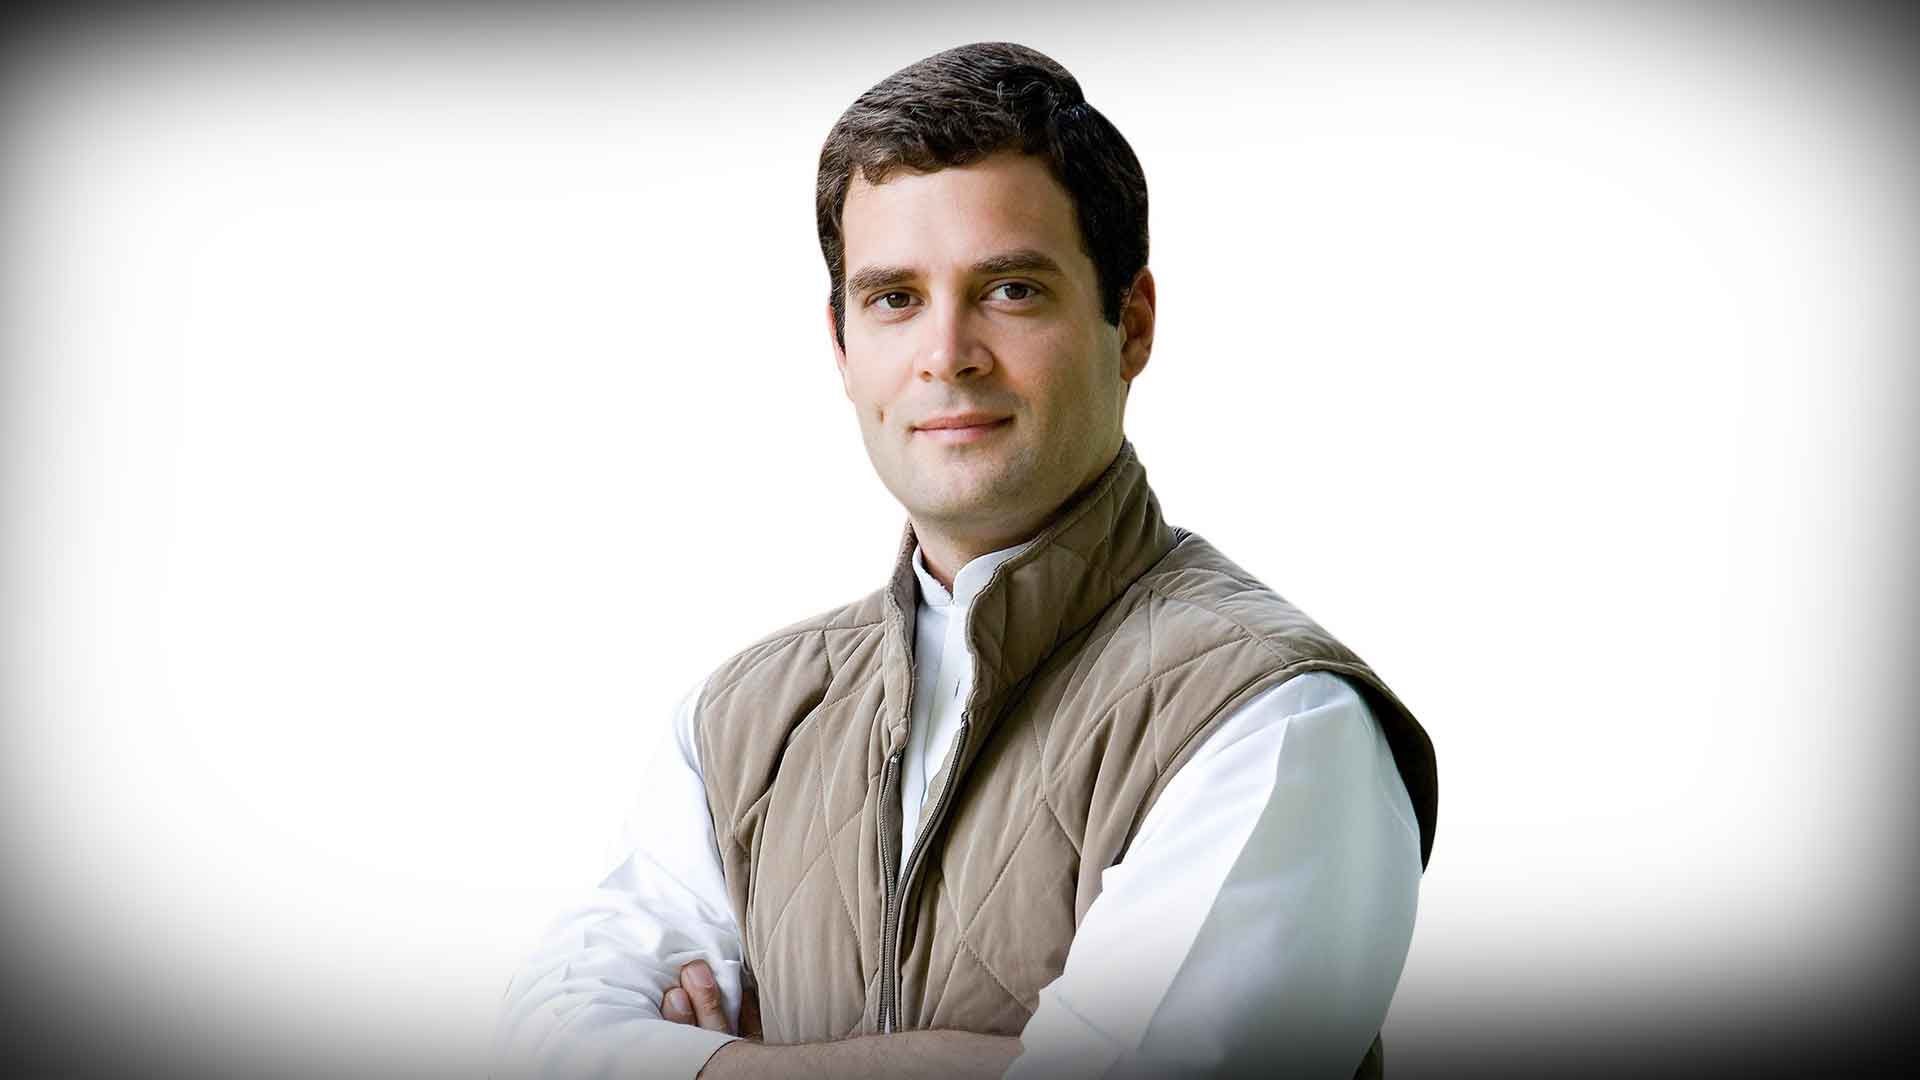 Rahul Gandhi Wallpaper - Most Handsome Indian Guy In The World - HD Wallpaper 